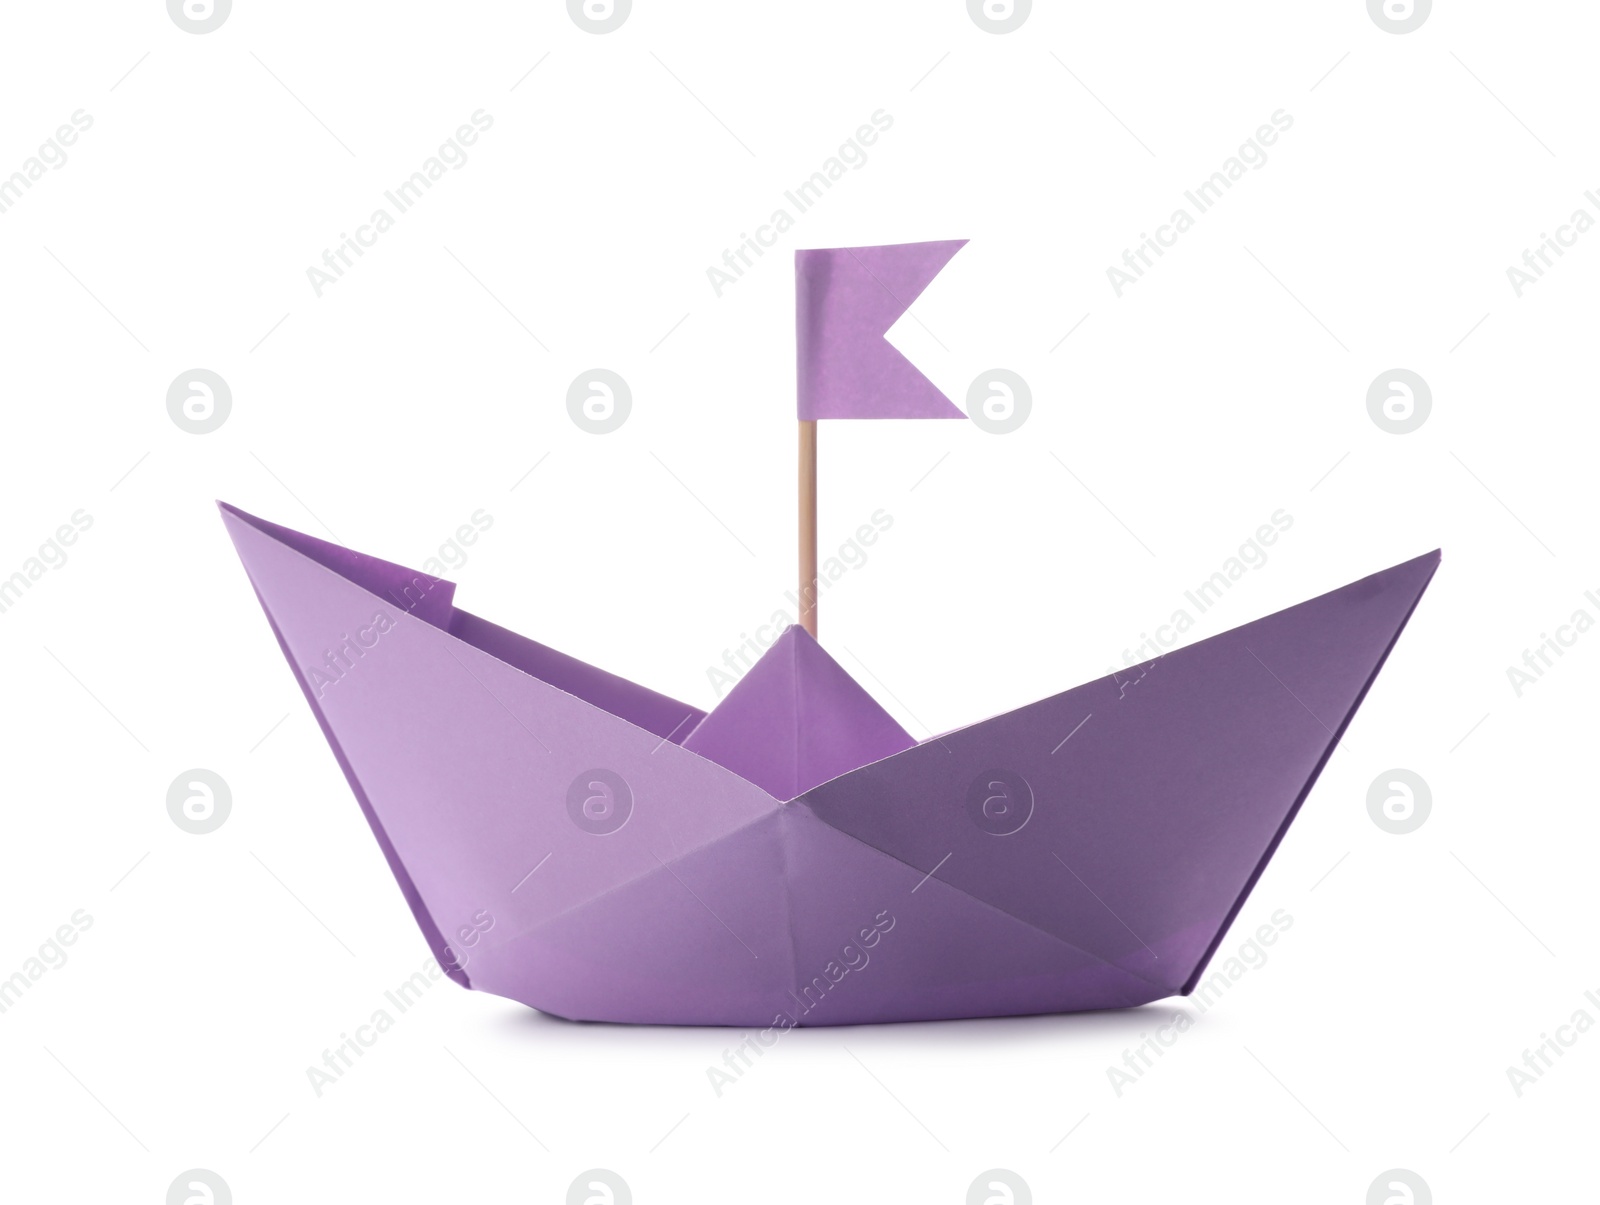 Photo of Handmade violet paper boat with flag isolated on white. Origami art